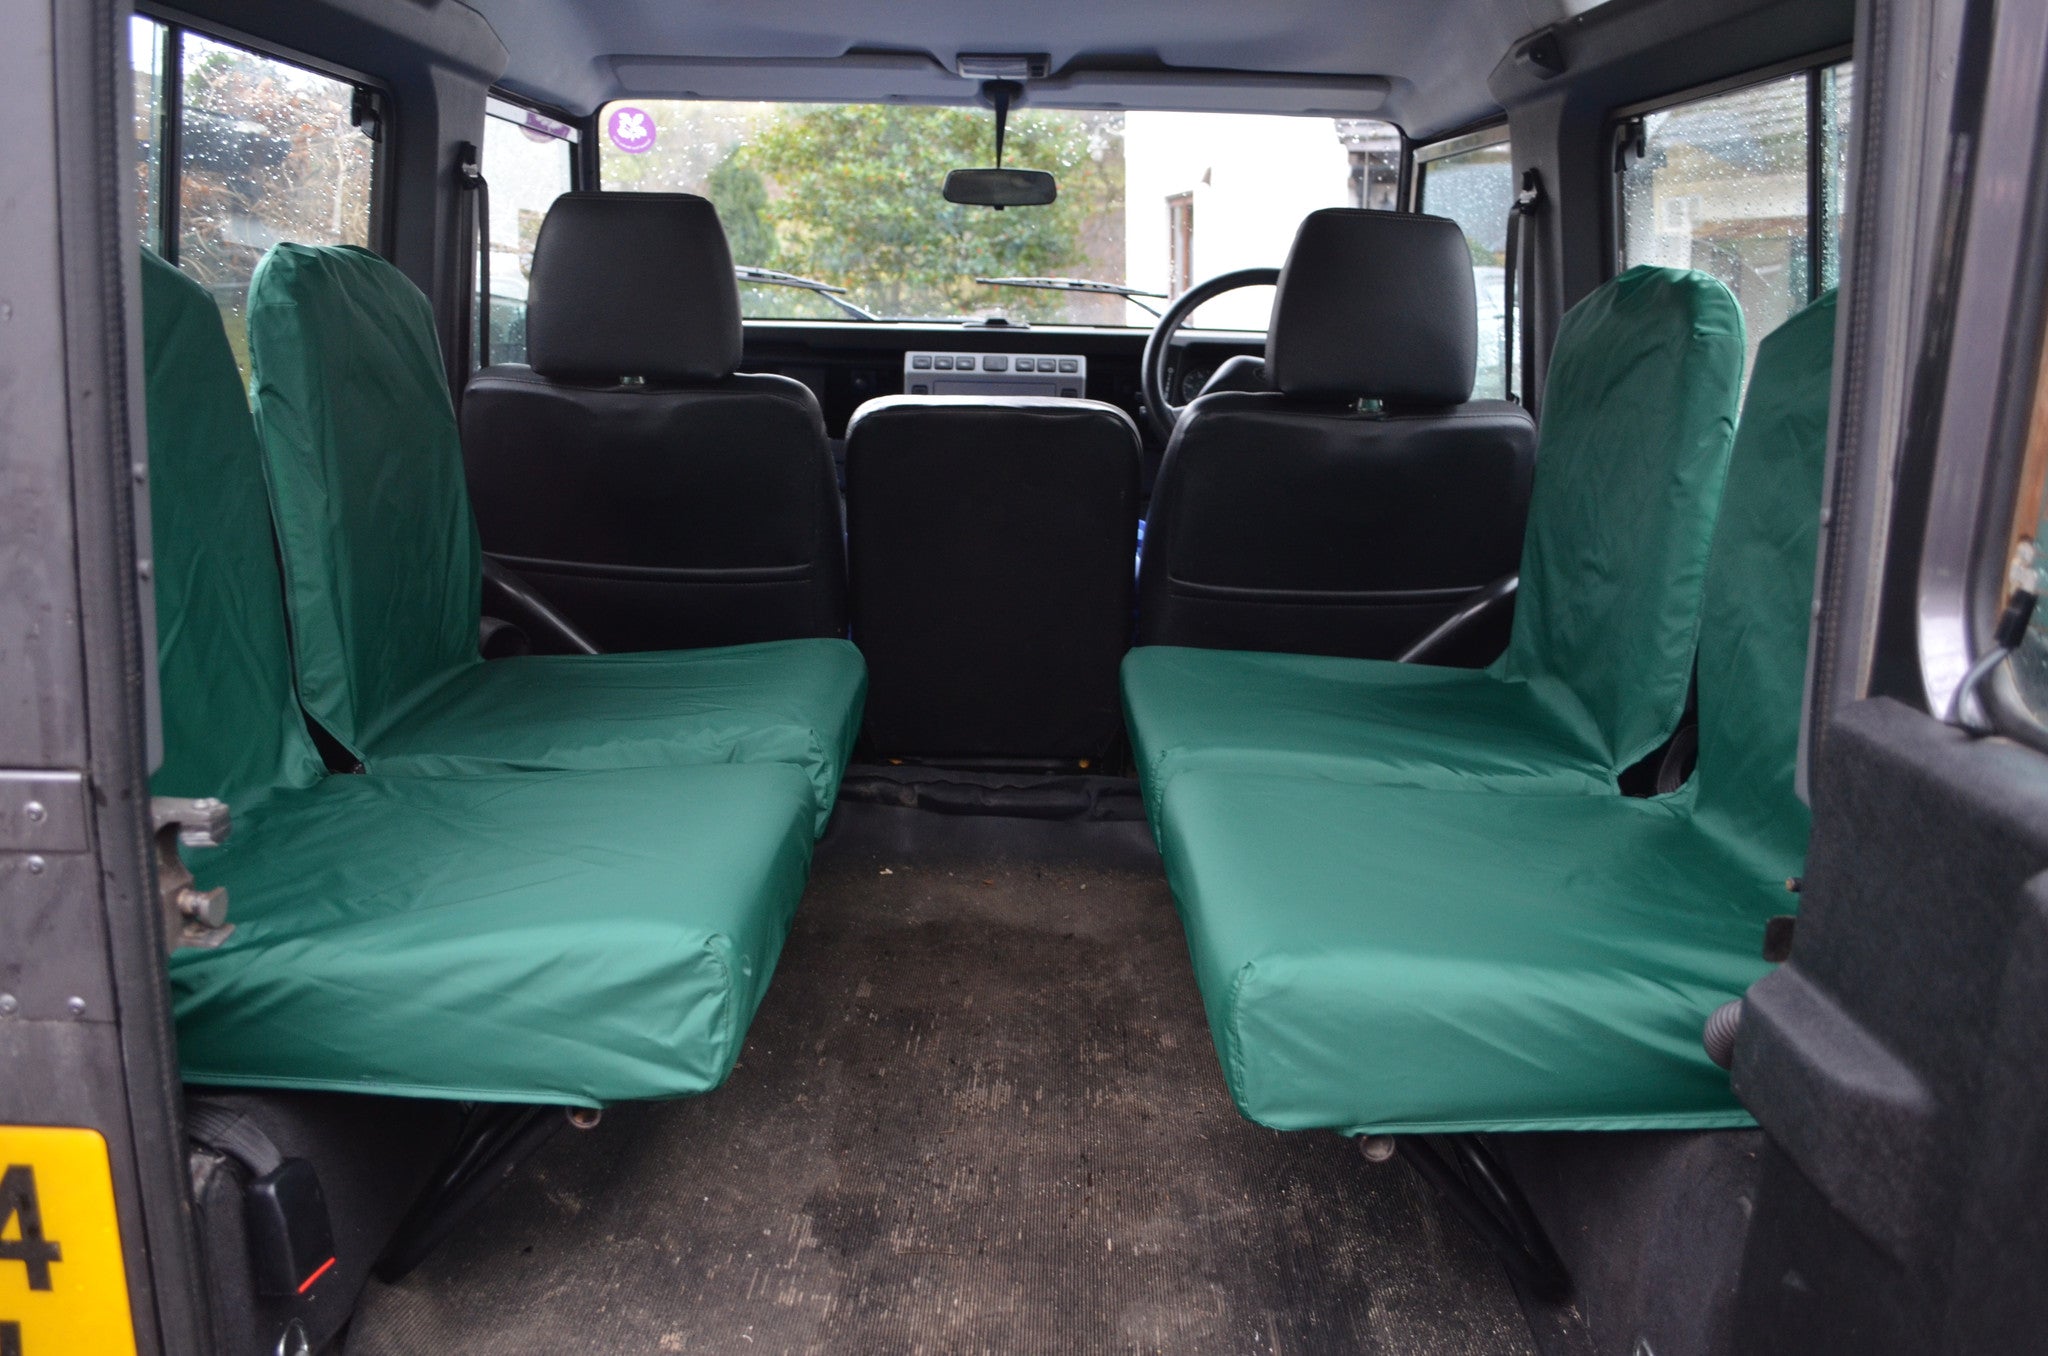 Land Rover Defender 1983 - 2007 Rear Seat Covers Set of 4 Dicky Seats / Green Turtle Covers Ltd